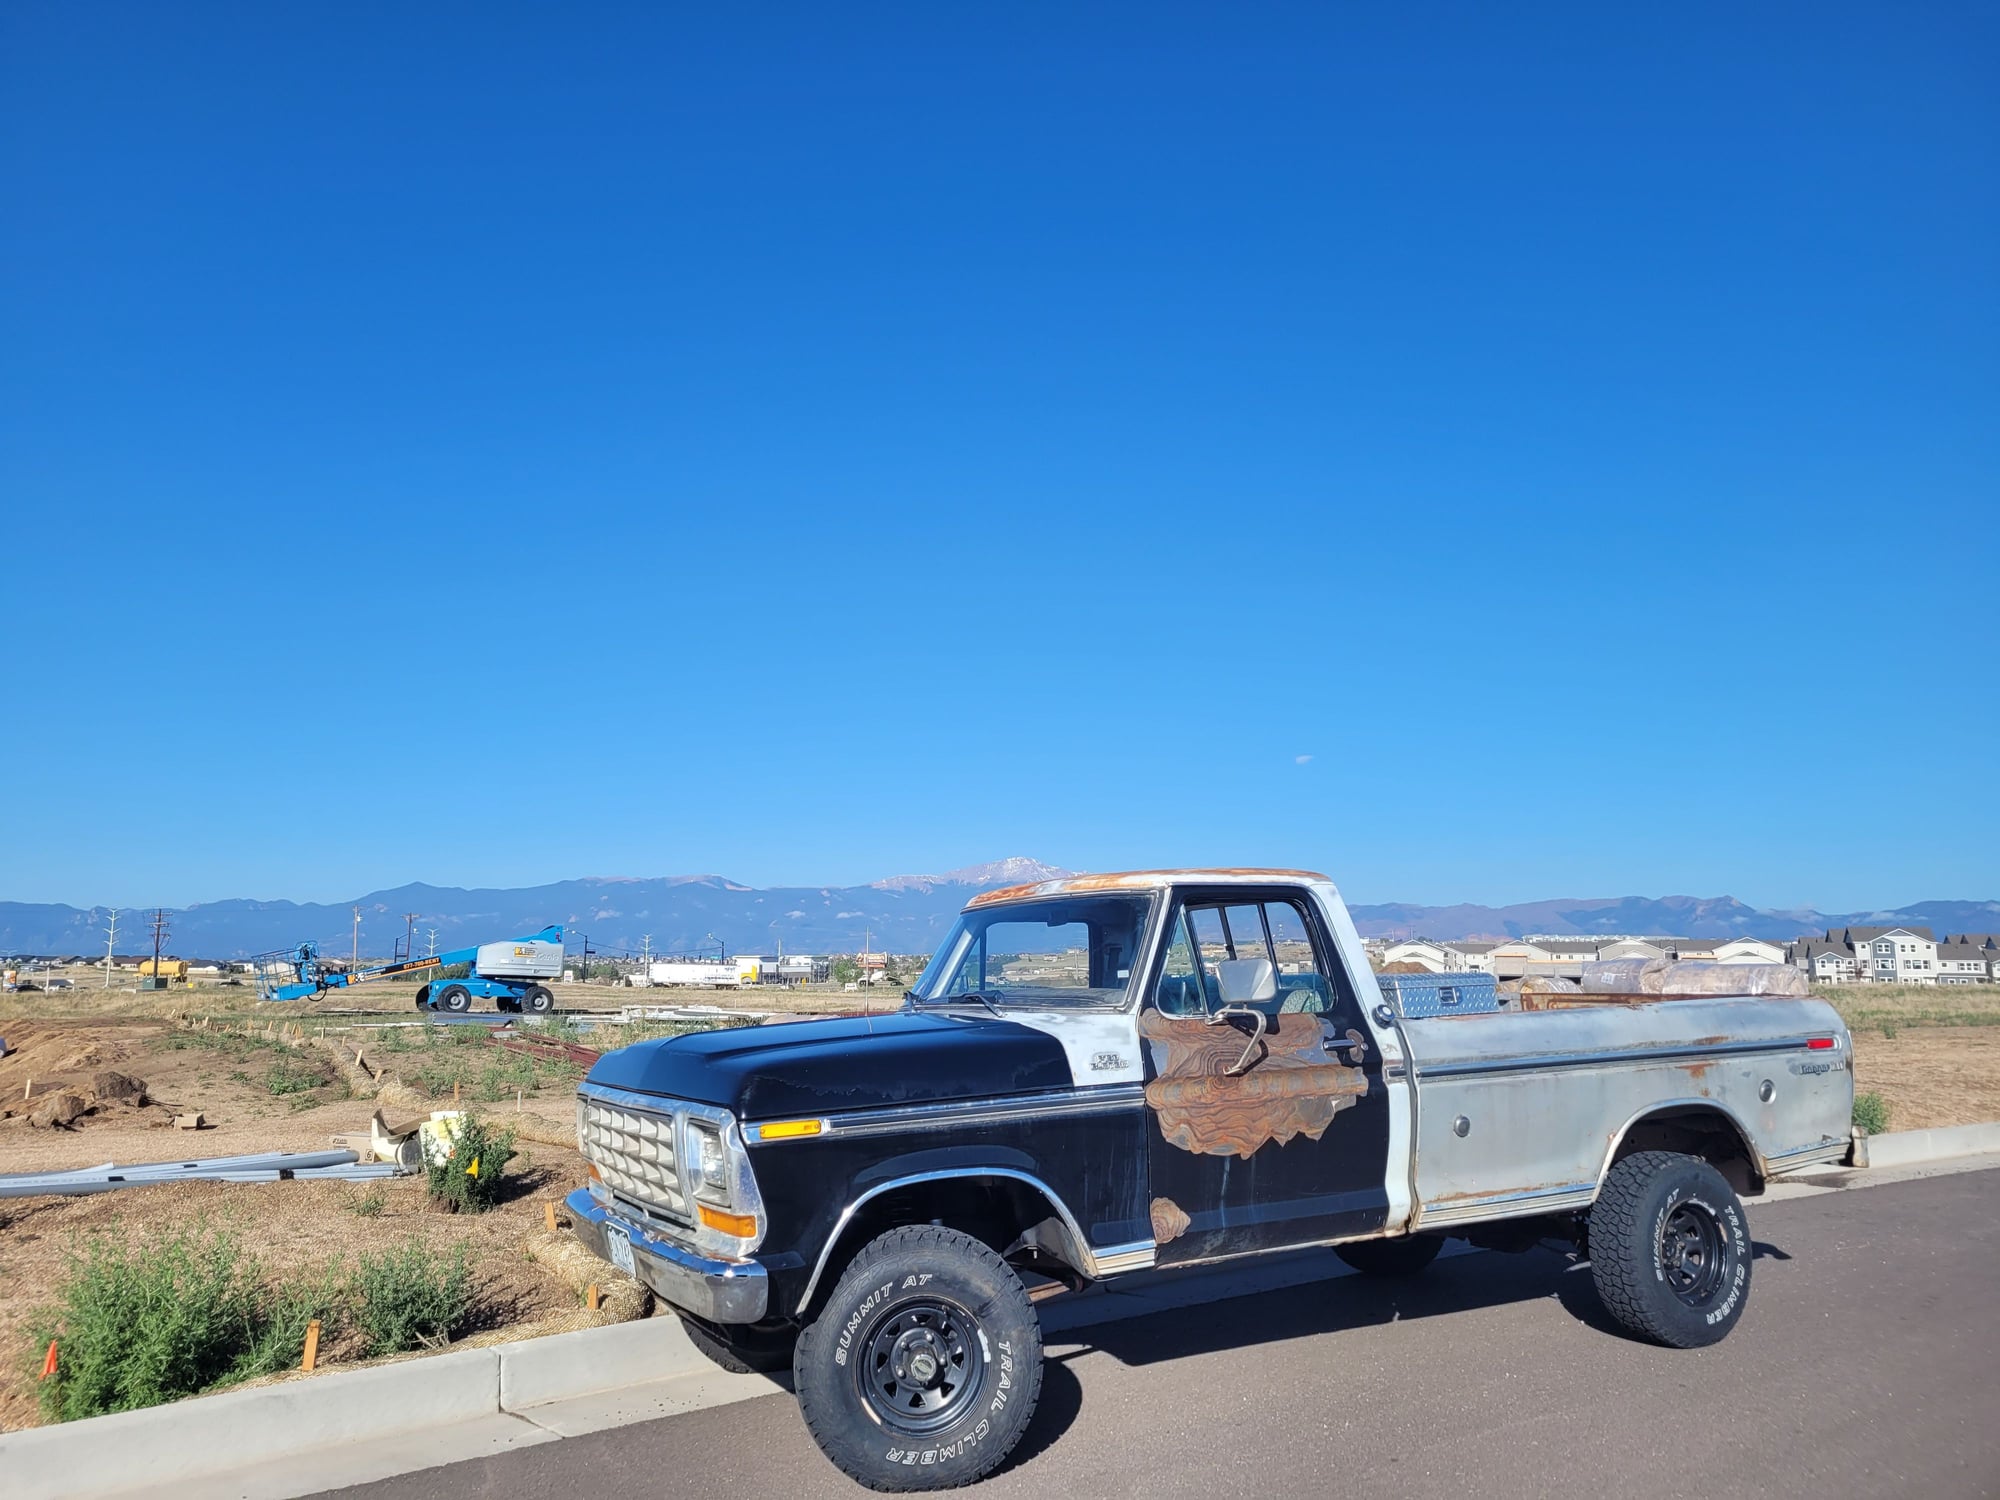 1977 Ford F-150 - 1977 F150 Ranger XLT - Used - VIN F14HRZ03736 - 81,000 Miles - 8 cyl - 4WD - Manual - Truck - Silver - Colorado Springs, CO 80919, United States